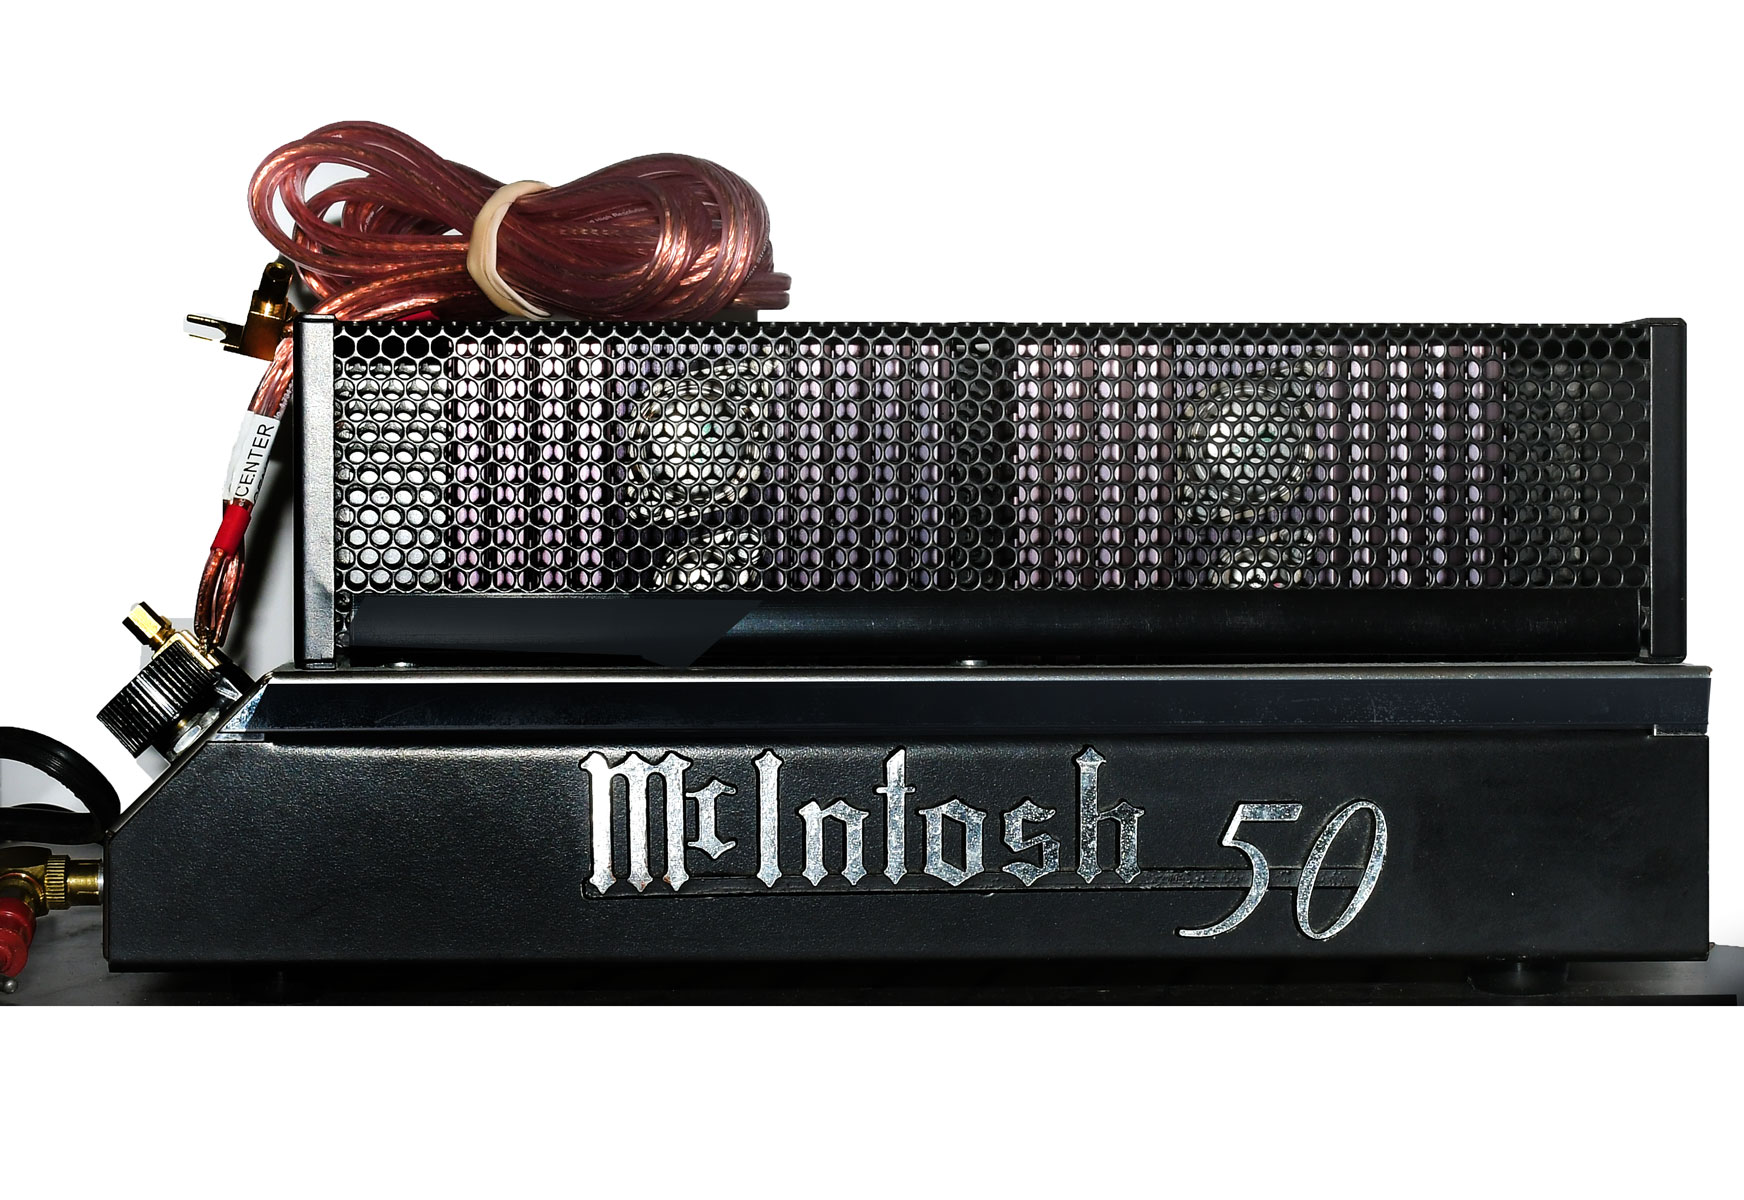 MCINTOSH 50 AMPLIFIER From the 275164